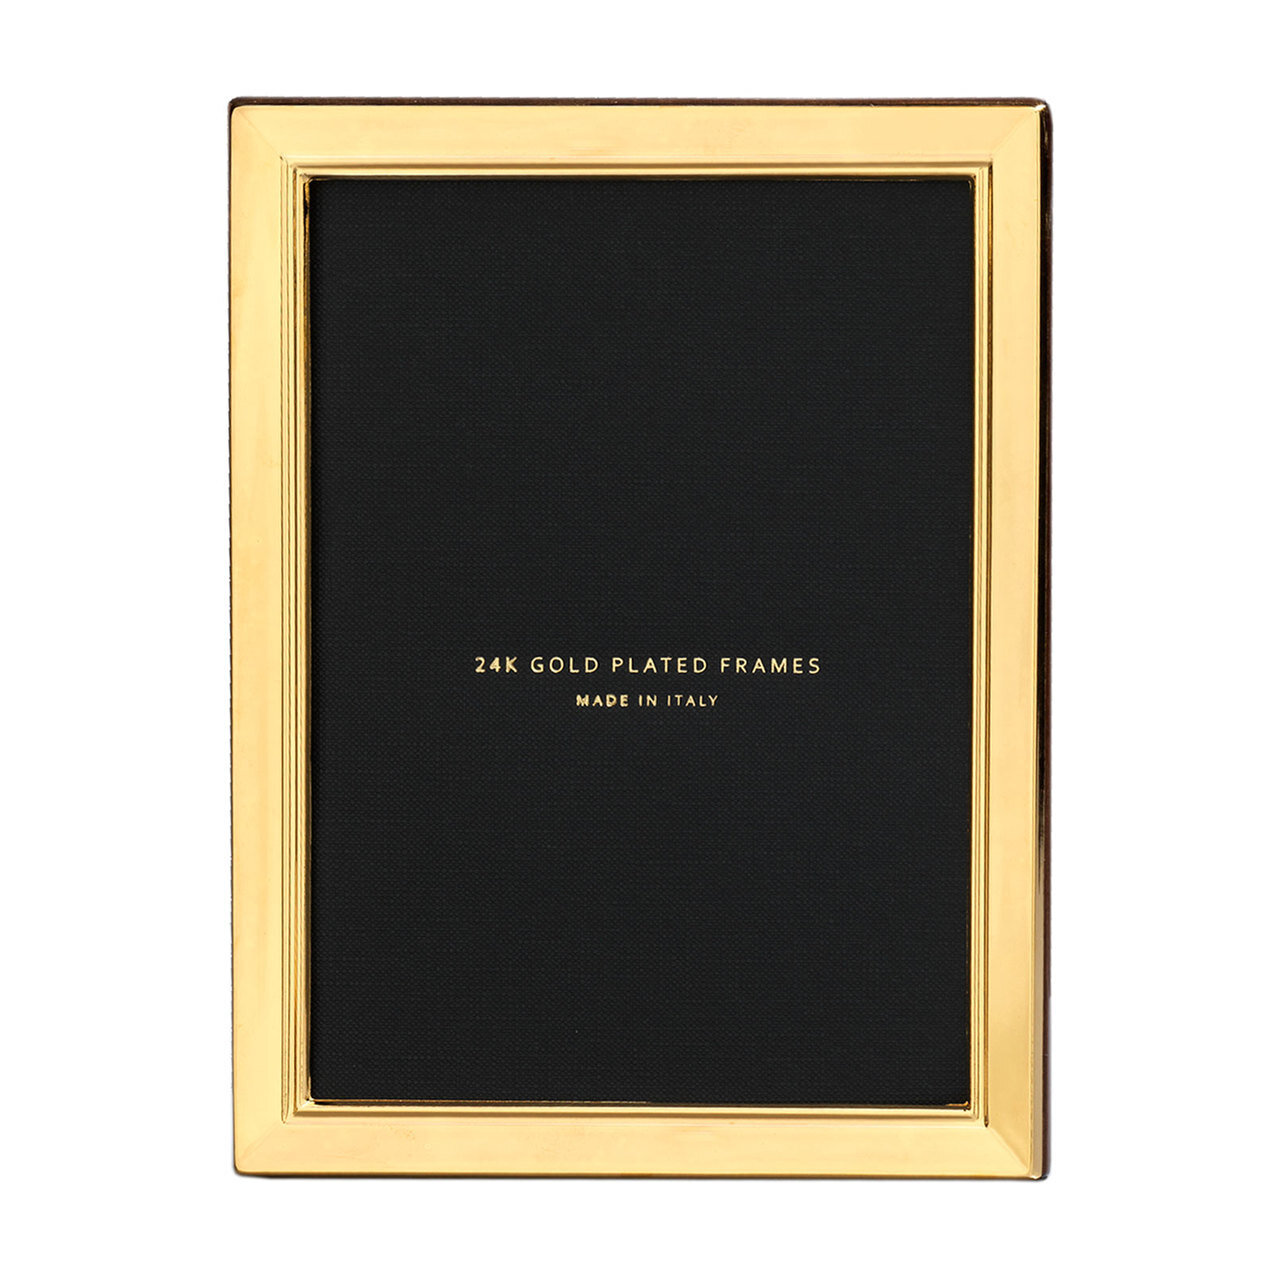 Cunill Metropolis 5 x 7 Inch Picture Frame - 24k Gold Plated 0.5 Microns